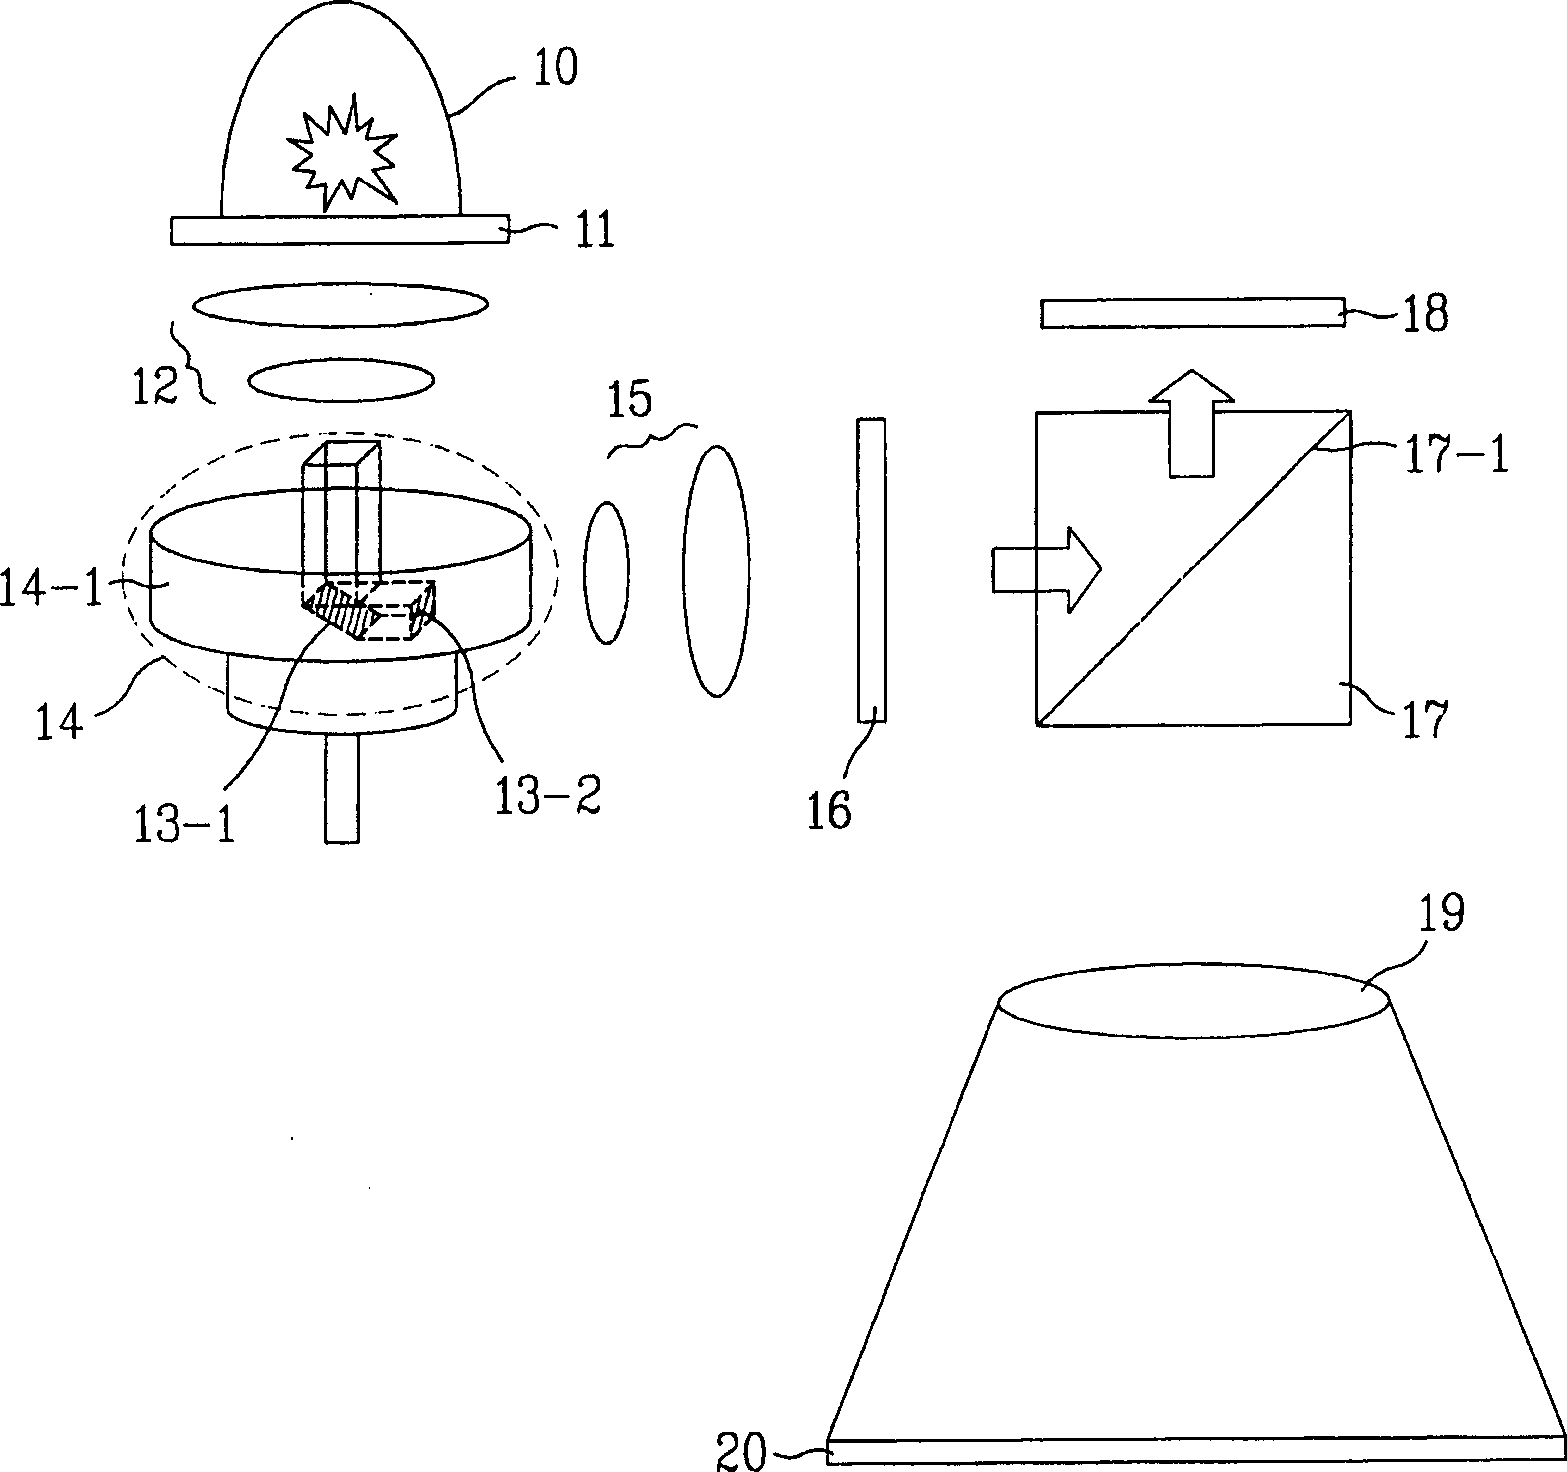 Optical projecting system with color drum